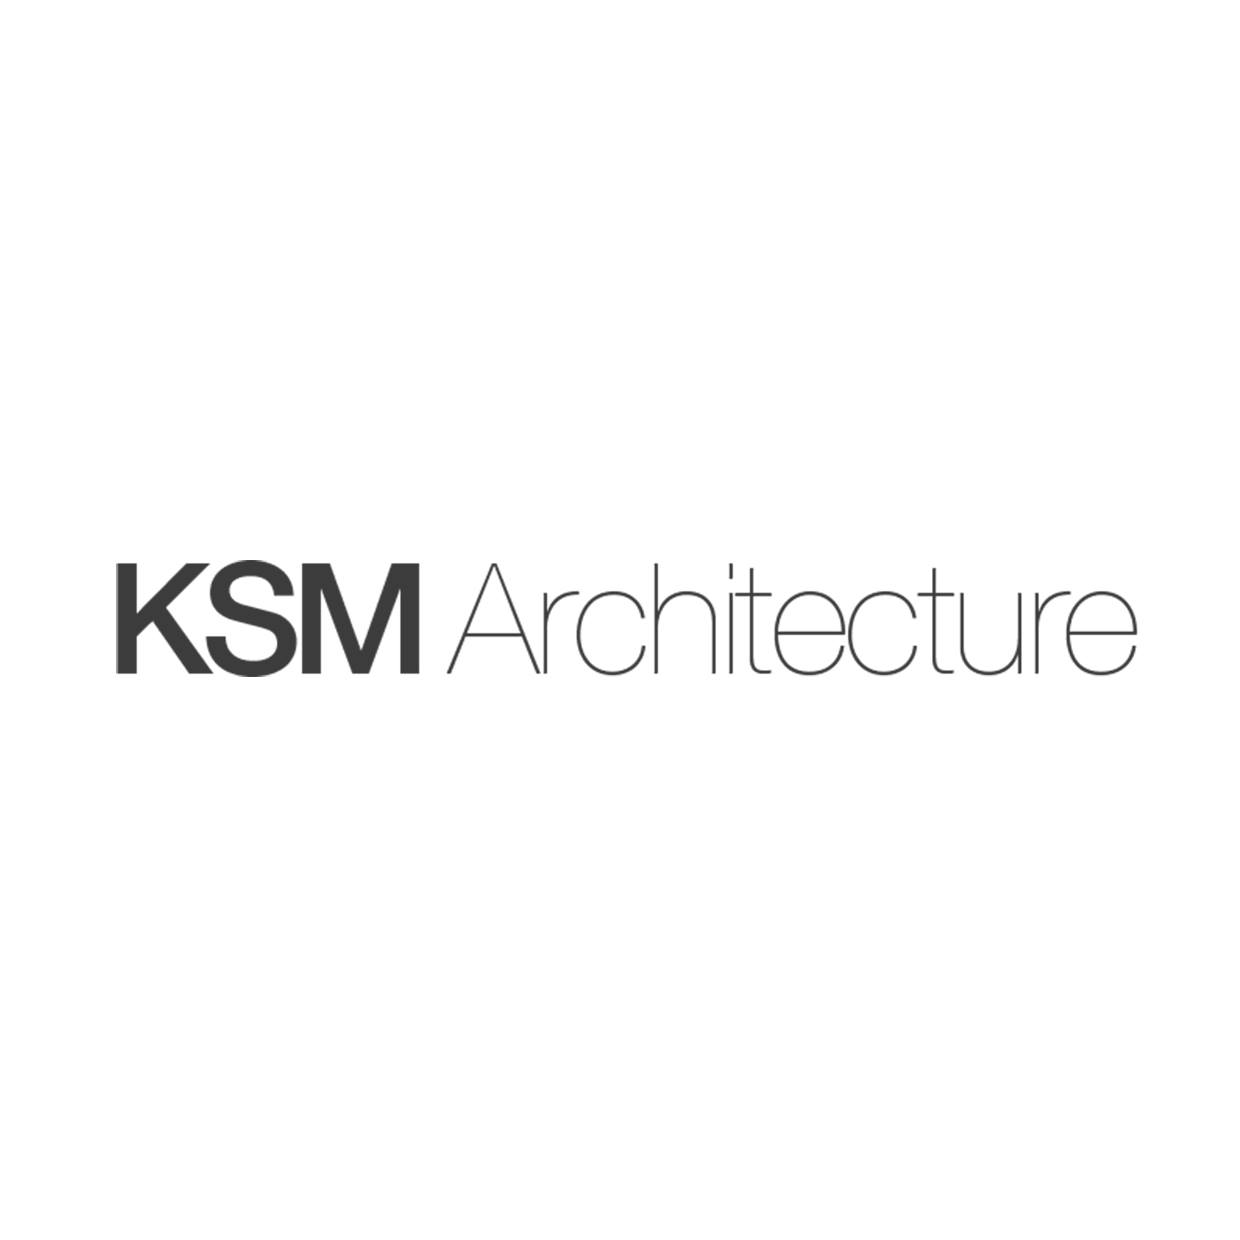 KSM Architecture|Accounting Services|Professional Services